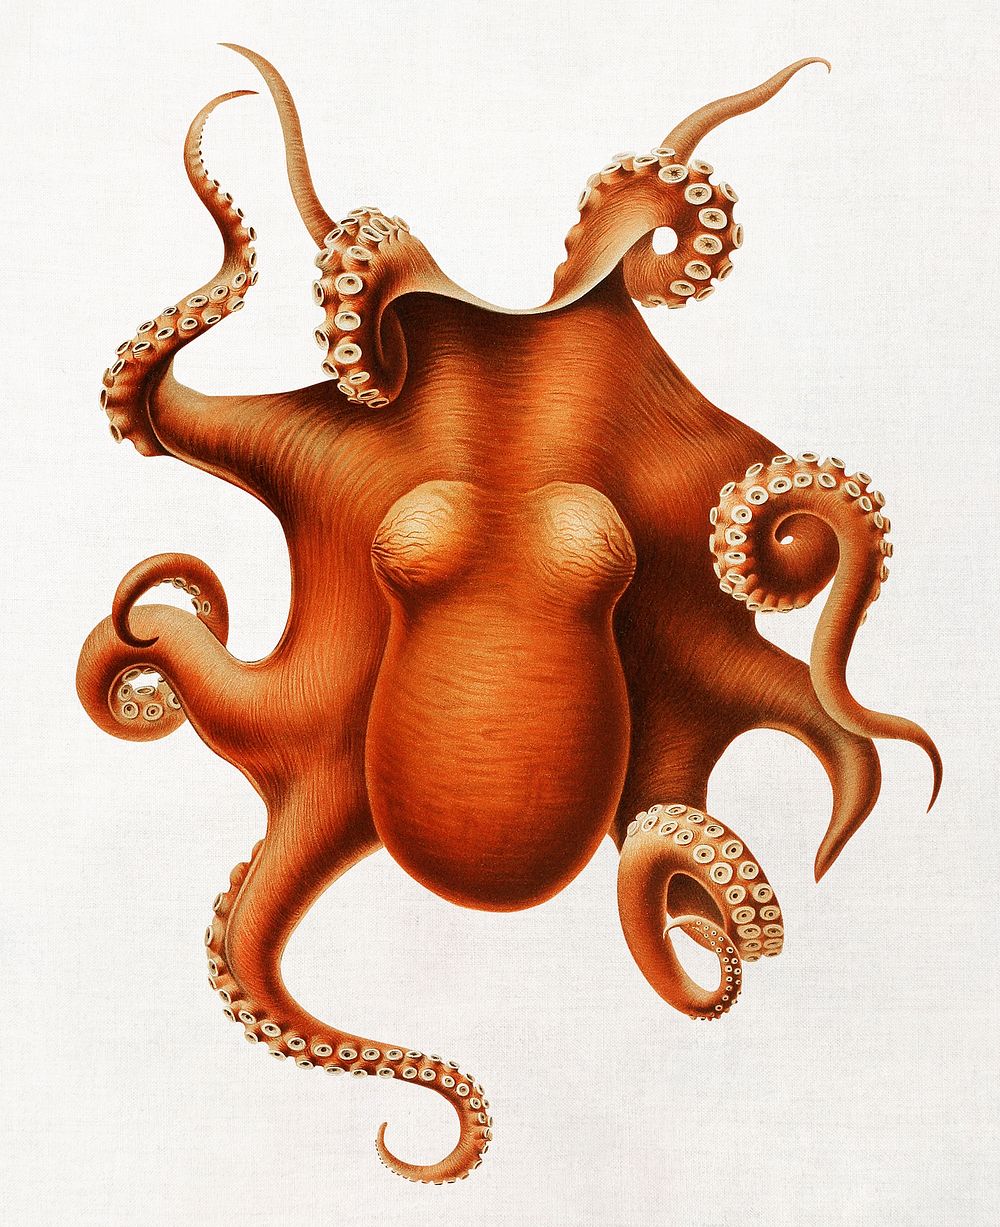 Octopus sea life illustration, remastered by rawpixel